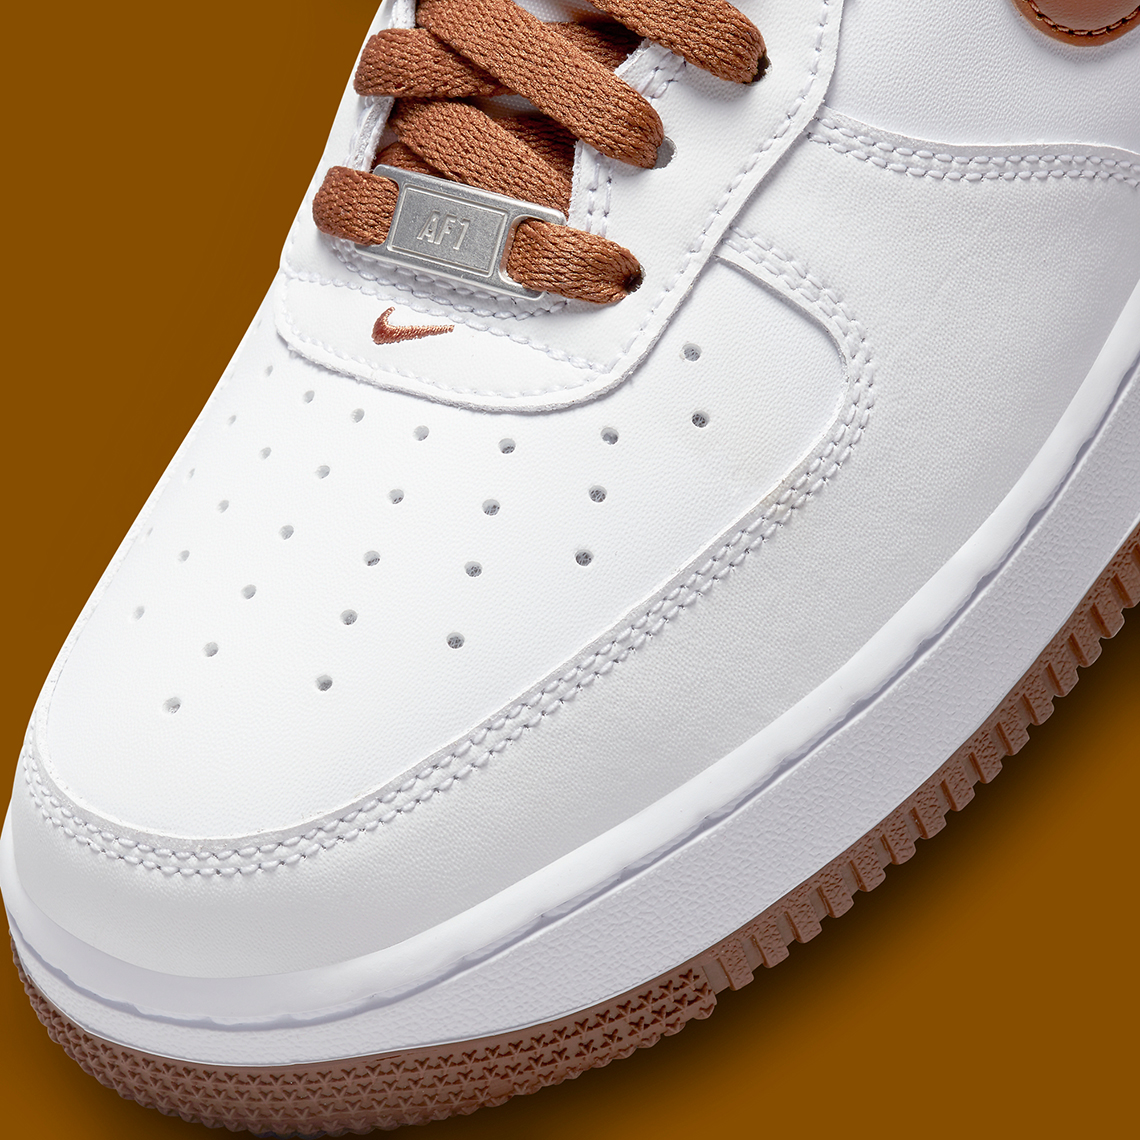 nike air force 1 low white pecan DH7561 100 release date 8